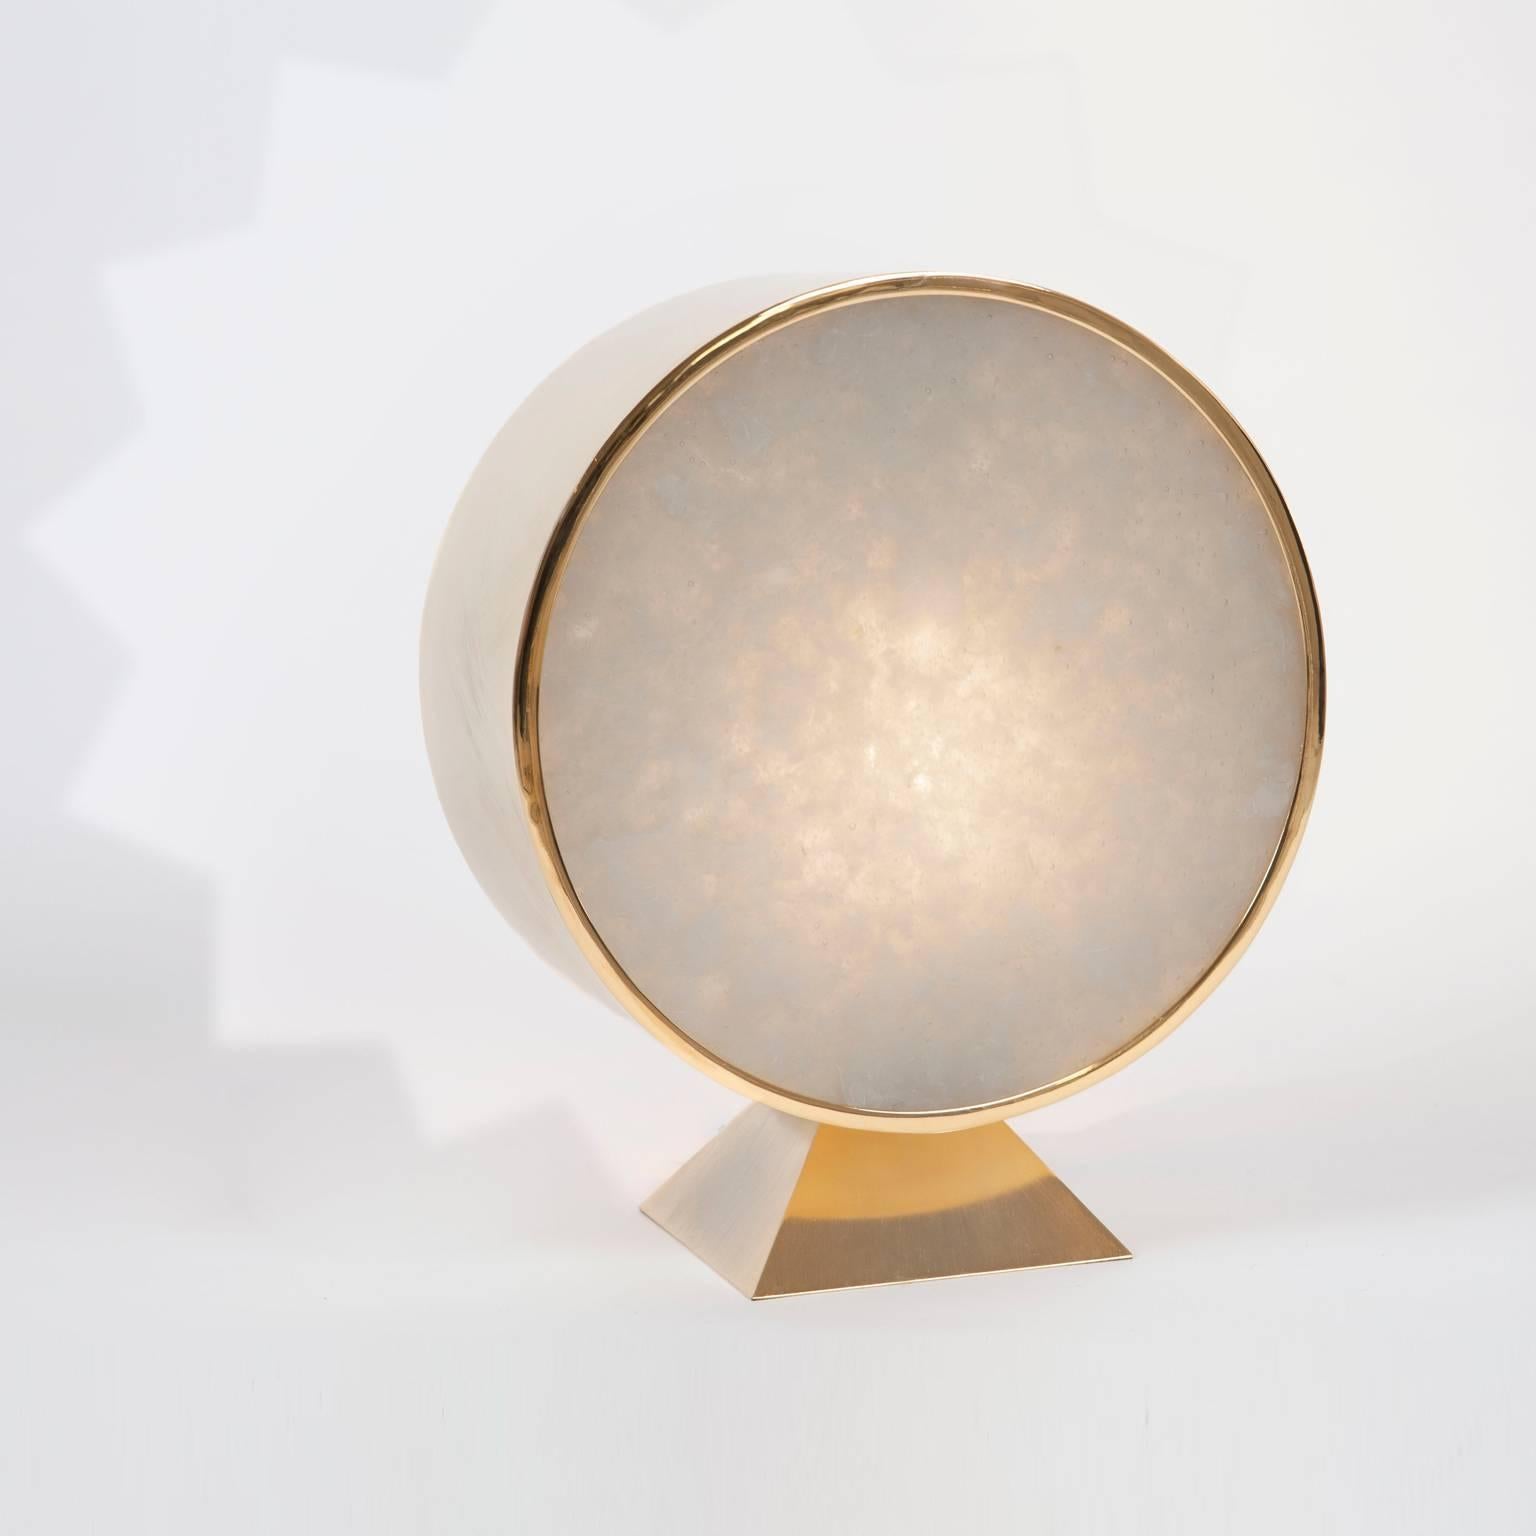 Table lamp in gold-plated gilt brass, clouded glass casted screen.
An adjustable sun pattern is projected on the wall behind the lamp when the switch is on.

Edition of 20. The pieces are signed and numbered.

About MuSigma:

Wonderfull moonscape or